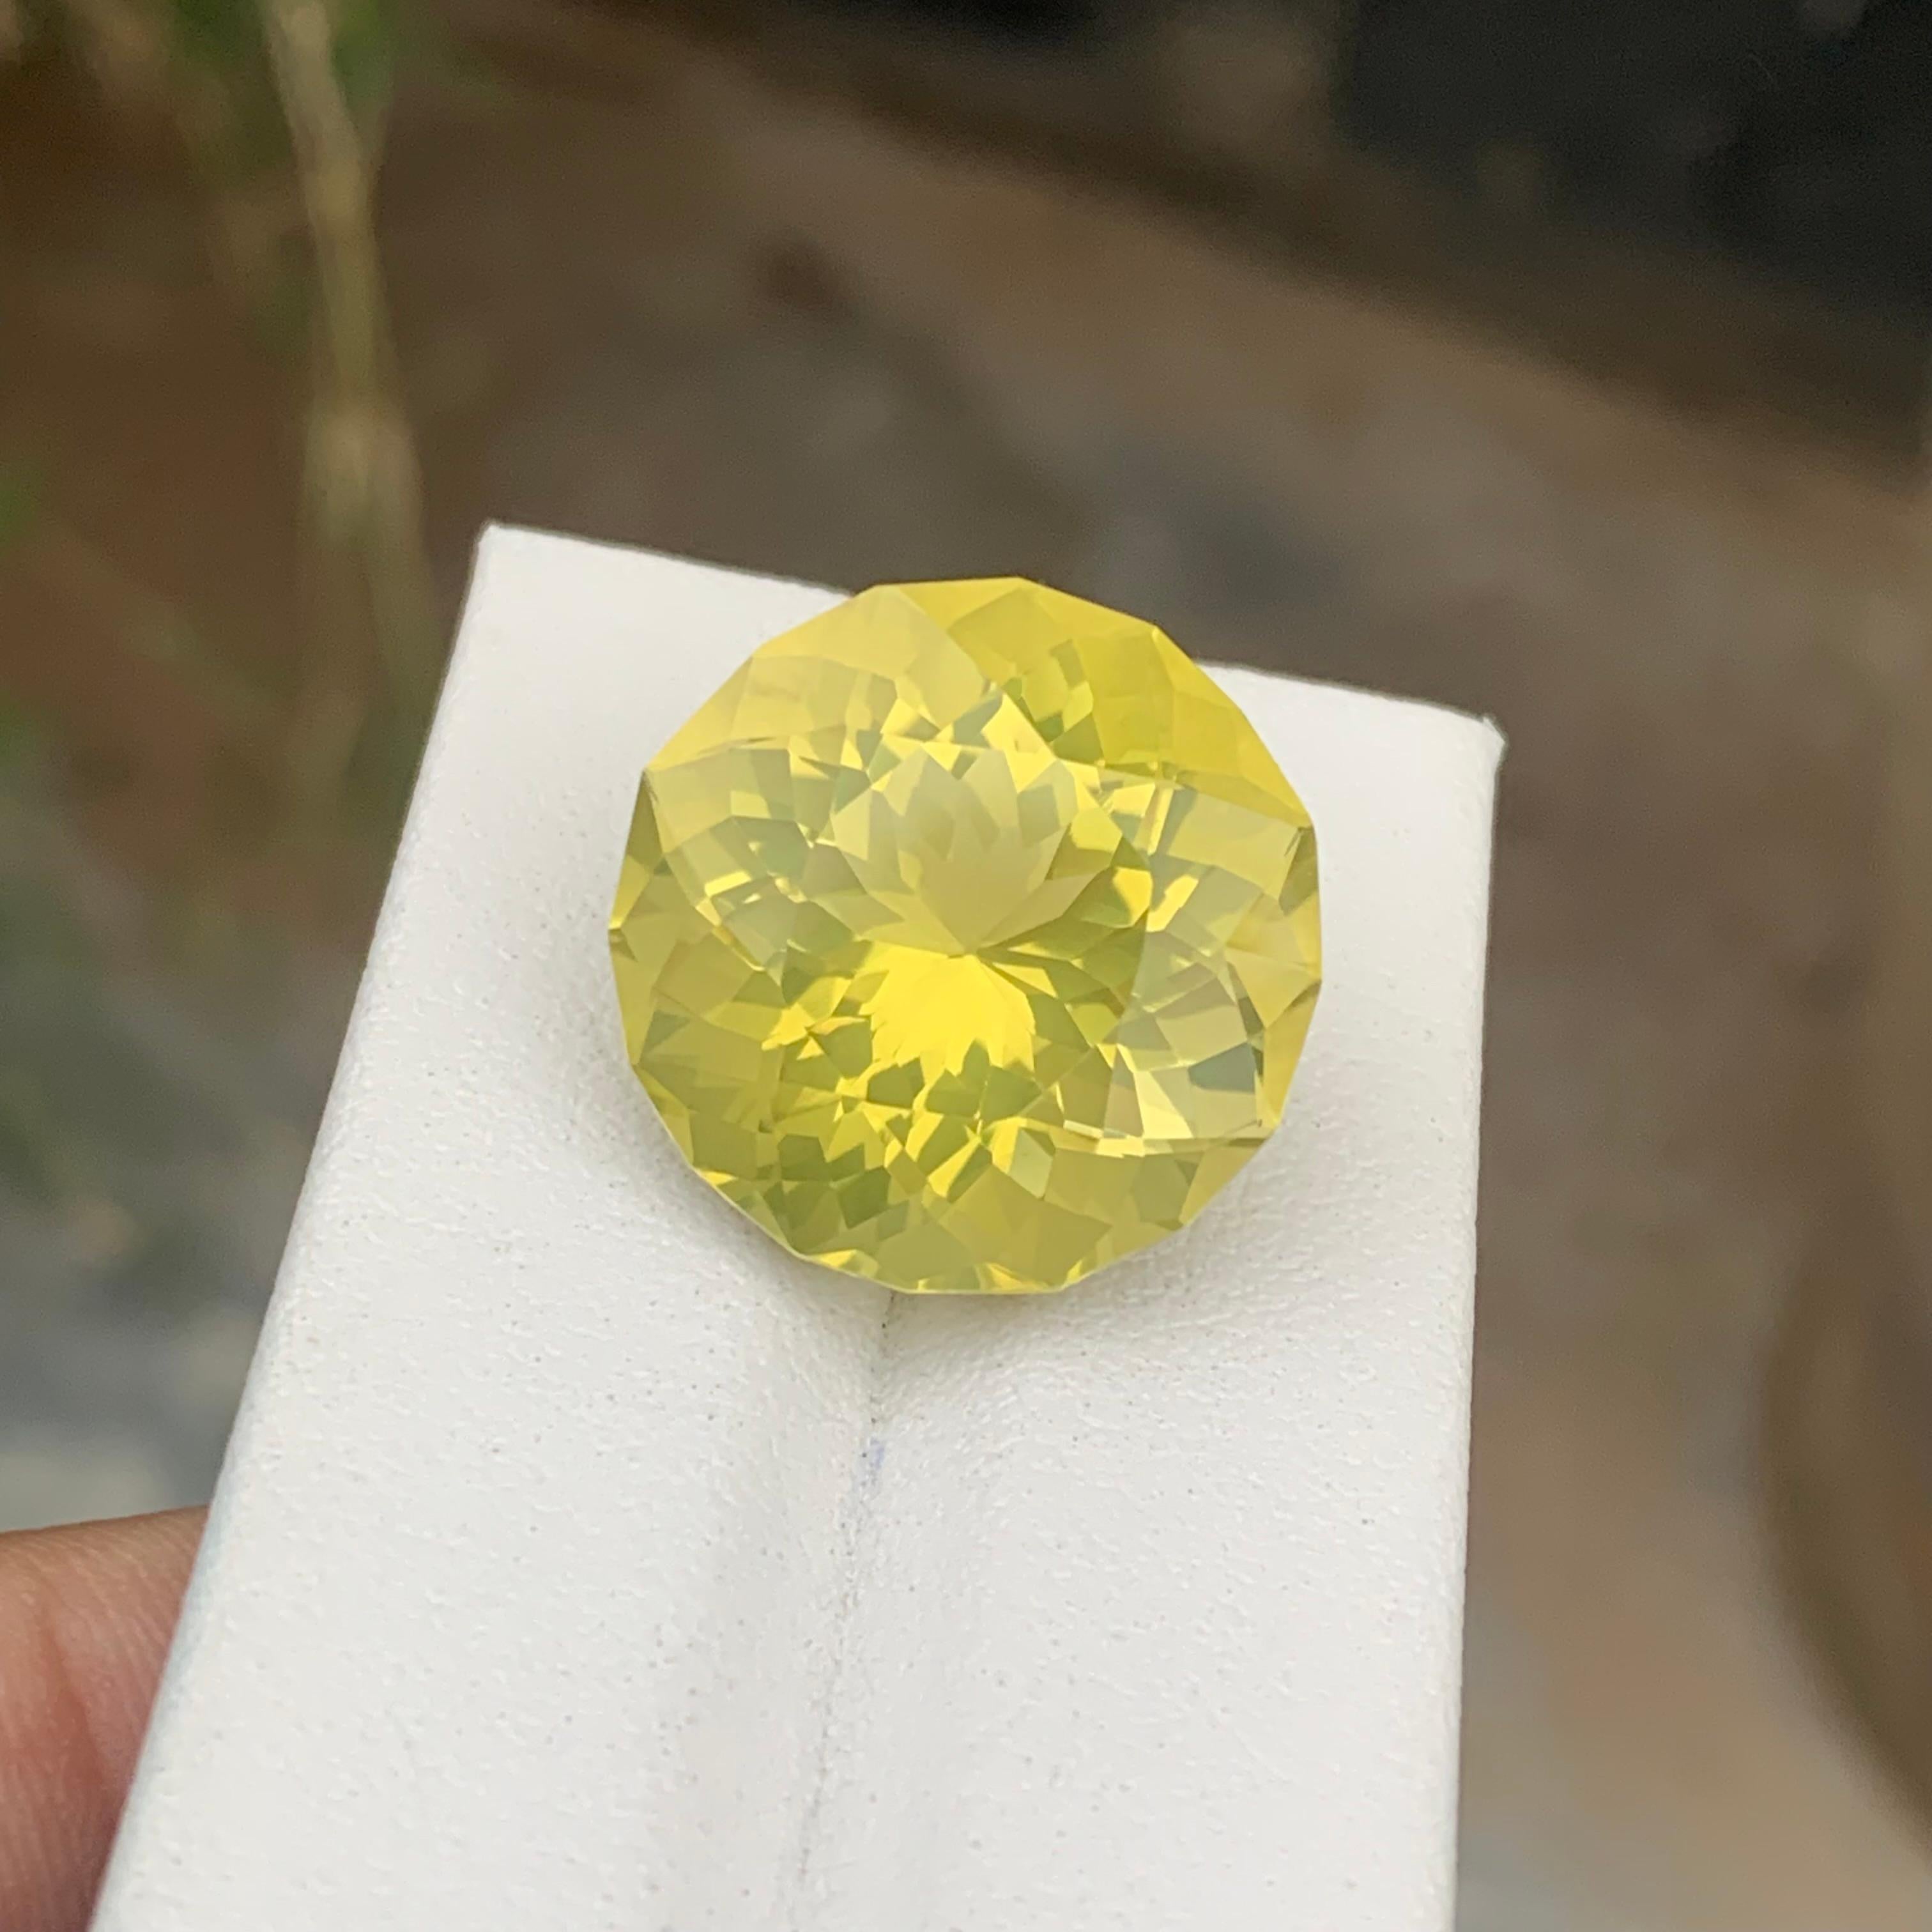 Gemstone Type : Lemon Quartz
Weight : 24.60 Carats
Dimensions : 19.5x19.5x13.3 Mm
Origin : Brazil
Clarity : Eye Clean
Shape: Round
Cut: Precision
Color: Yellow
Certificate: On Demand
This sensitive tone not only works well in female jewellery but